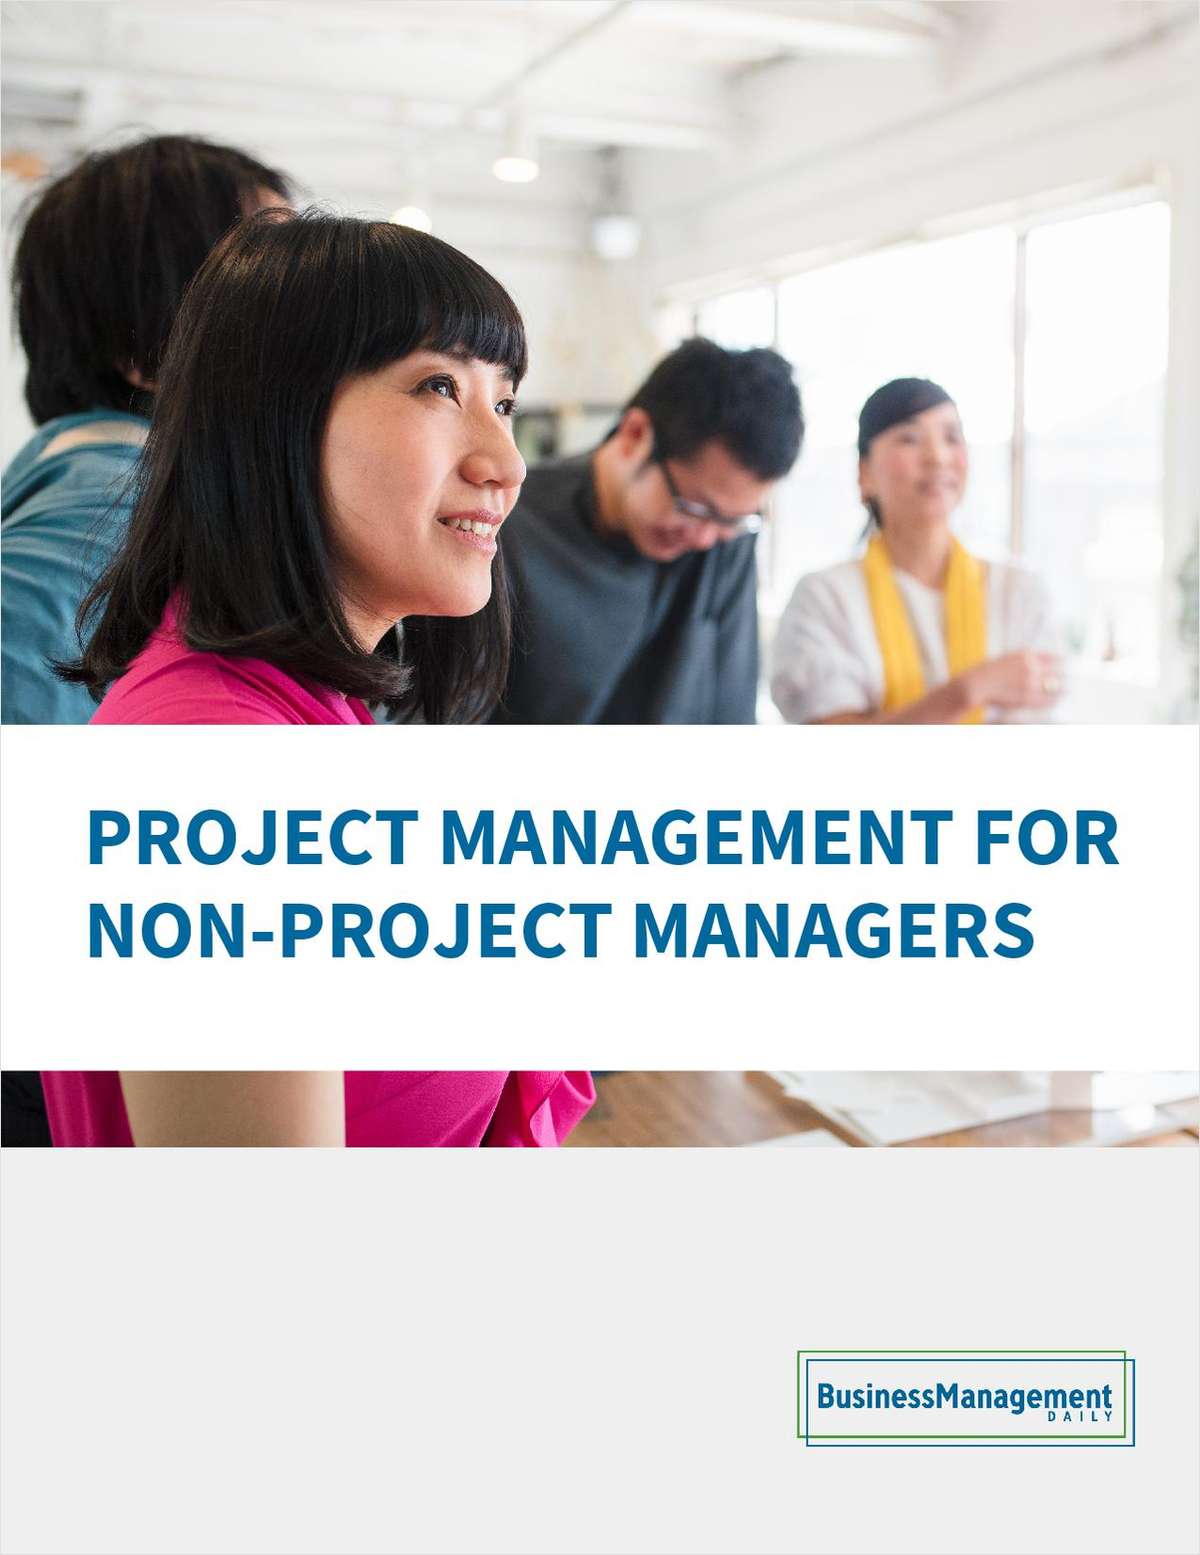 Project Management For Non-Project Managers